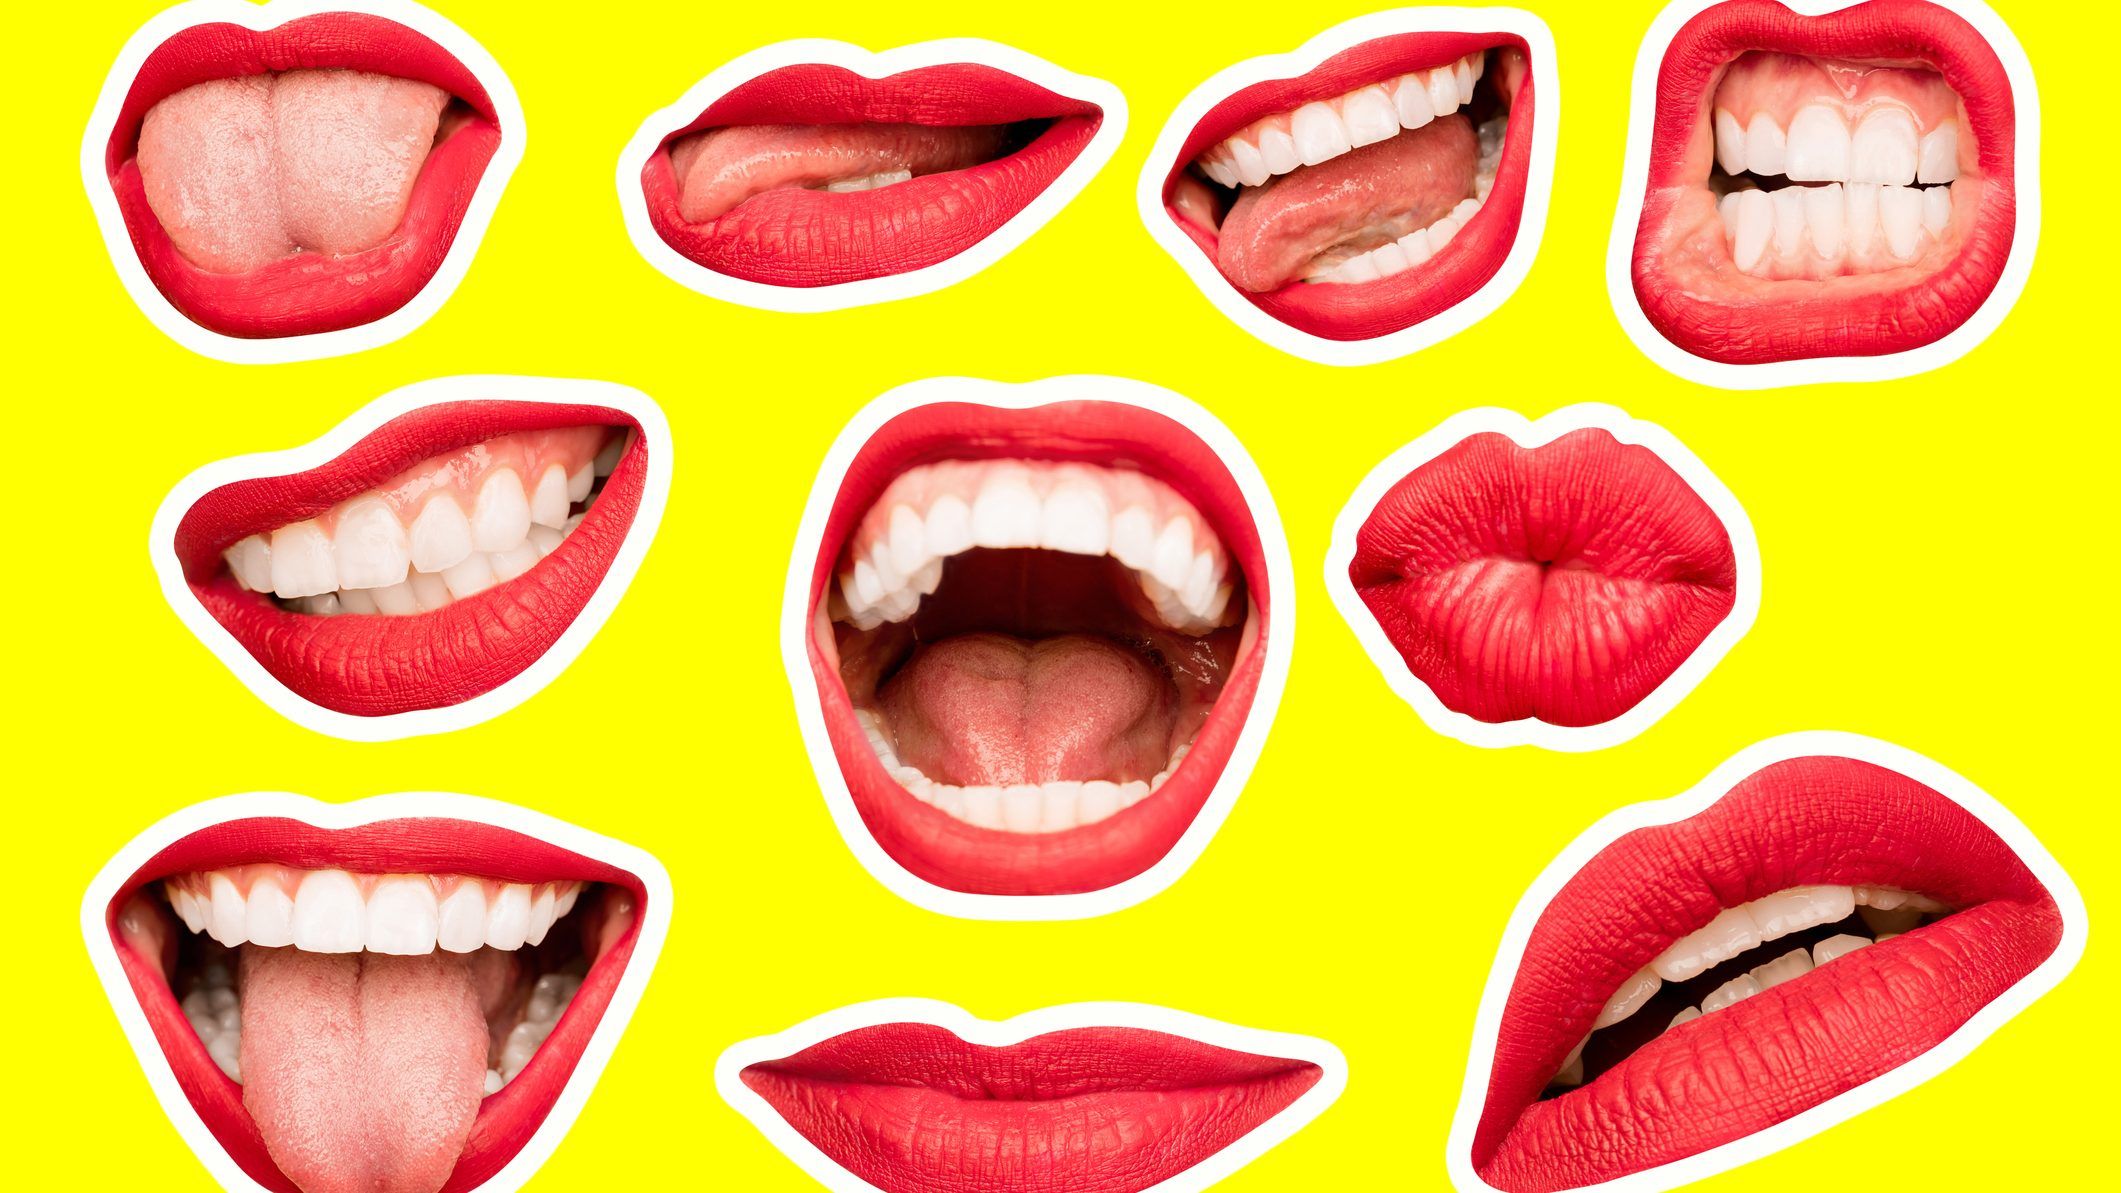 Don't lick them: What you need to know about chapped lips